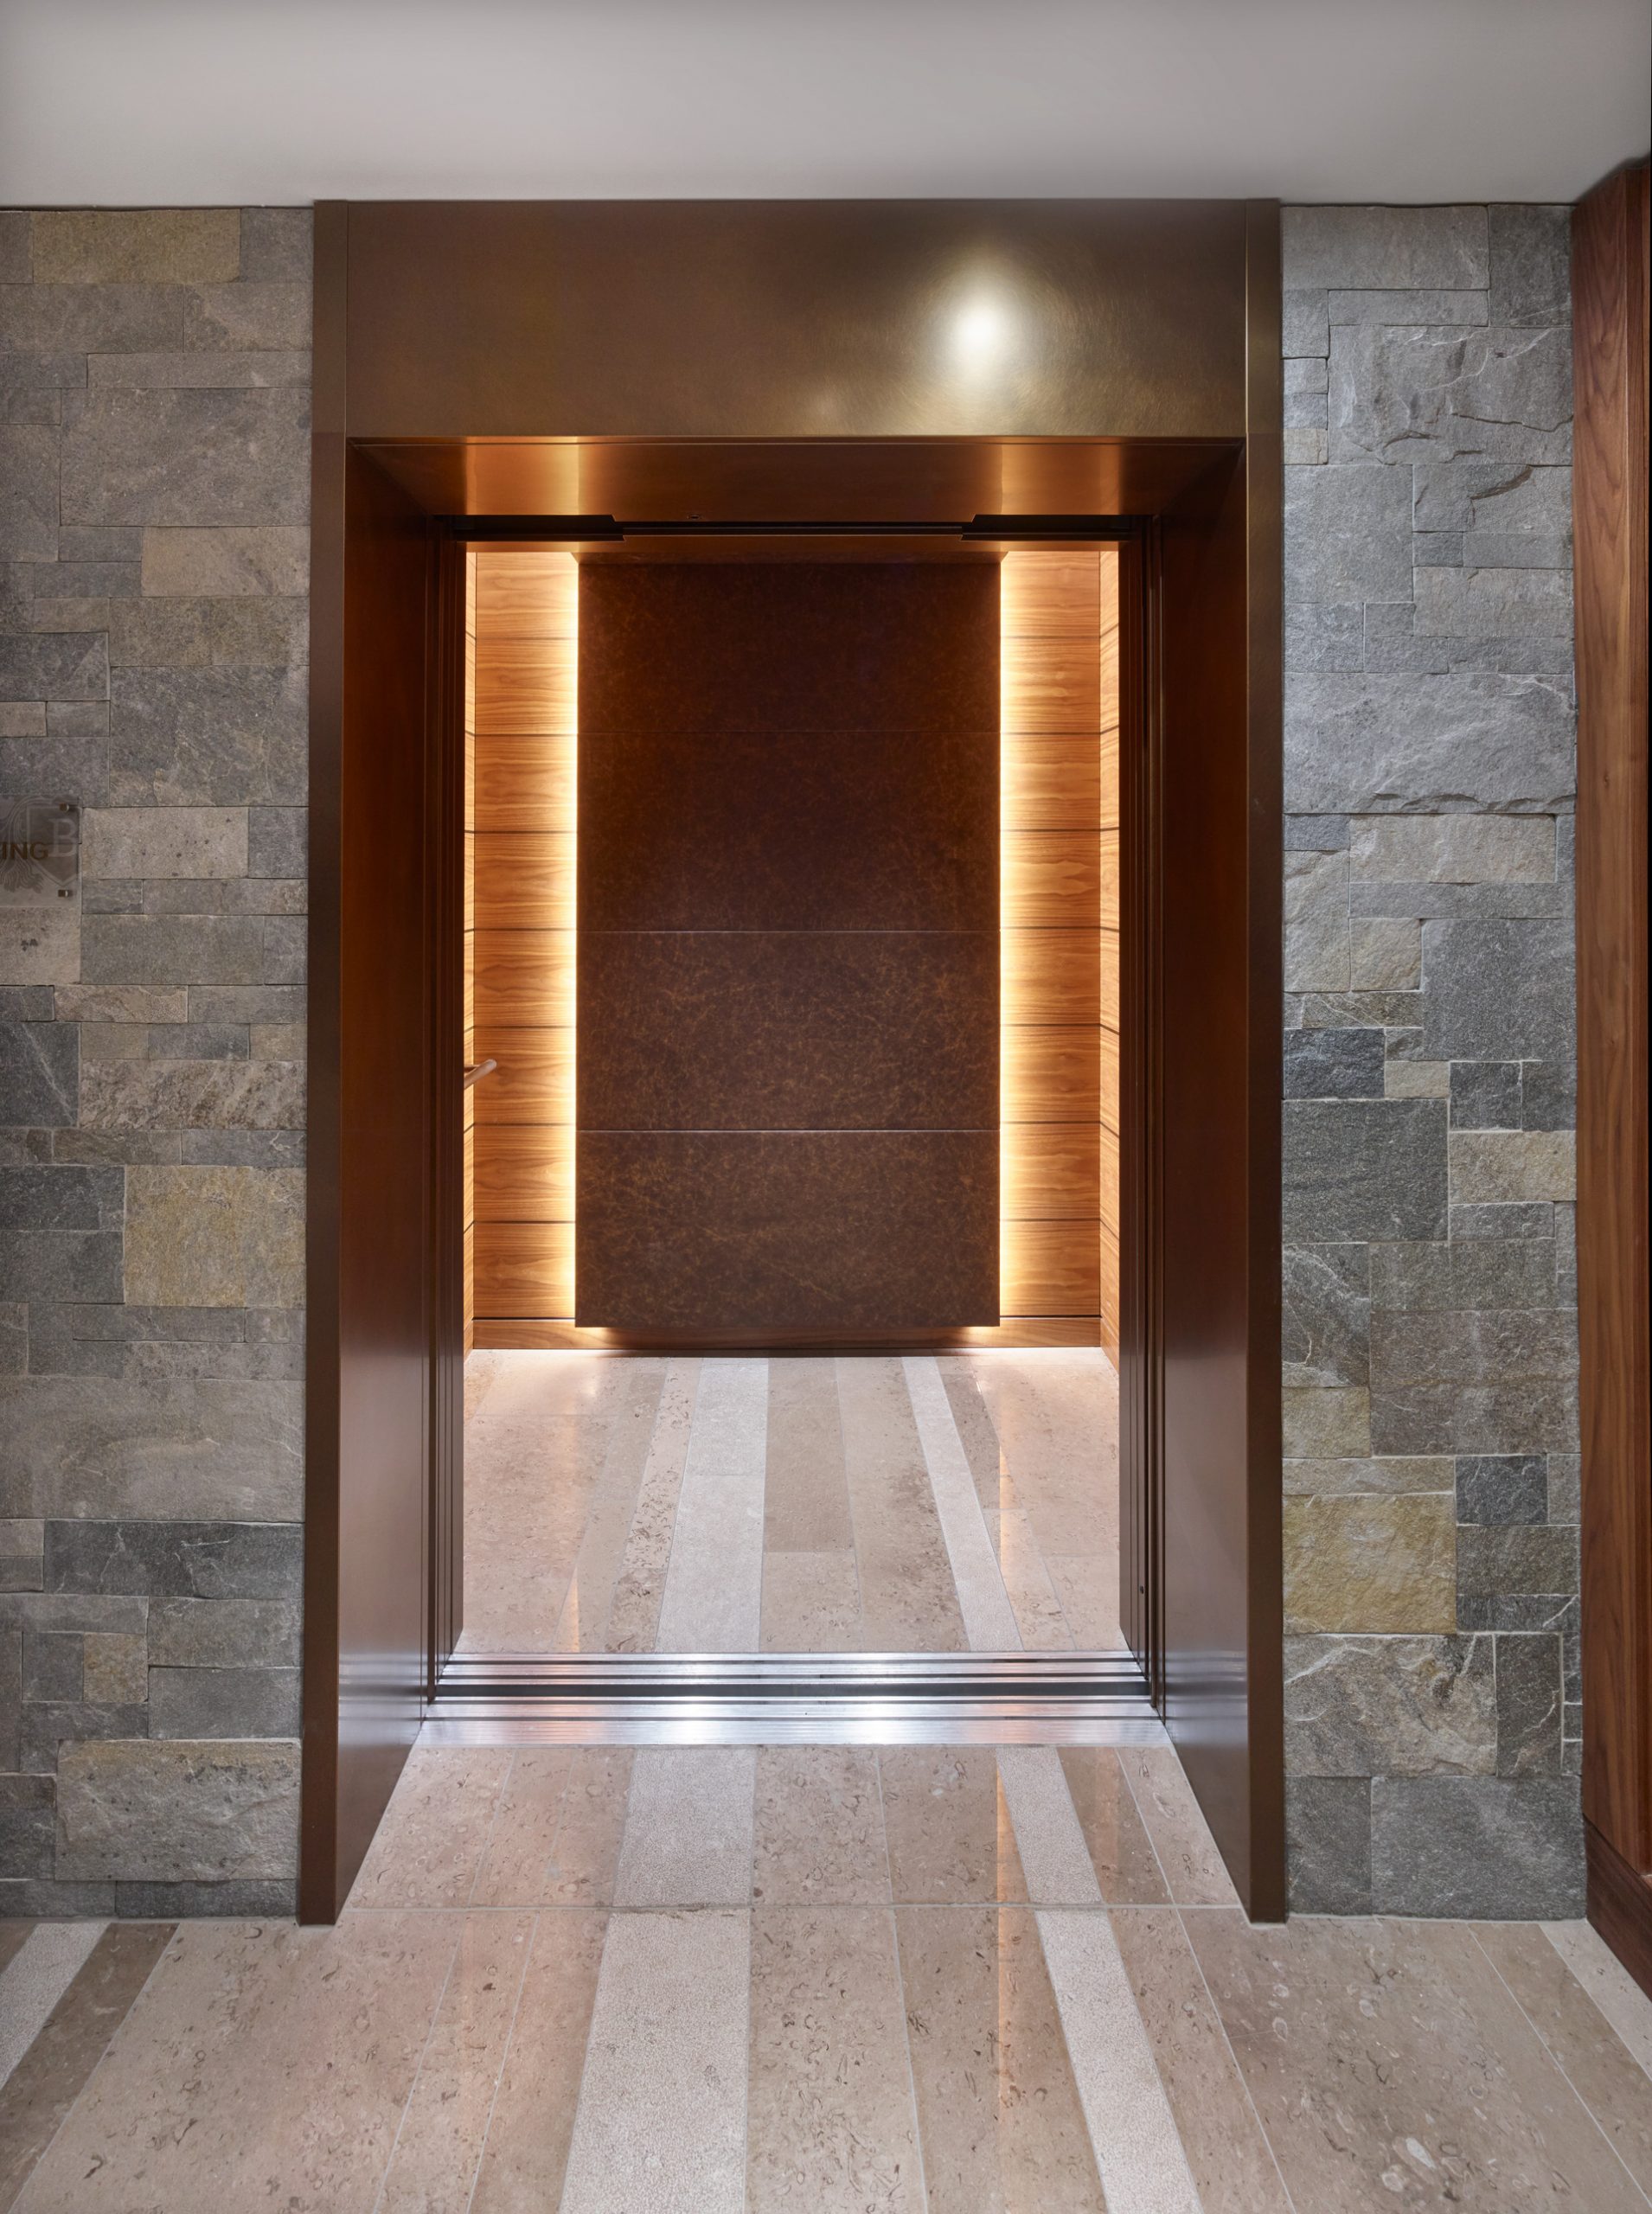 Doorway inside the Hotel Bürgenstock. The Doorway has semi-matter Nordic Décor copper finish while walls around it are stonework. Floor has reflective stone texture. The doorways leads to another corridor which has a copper element panel in the end of it. Copper element has a light source behind it.